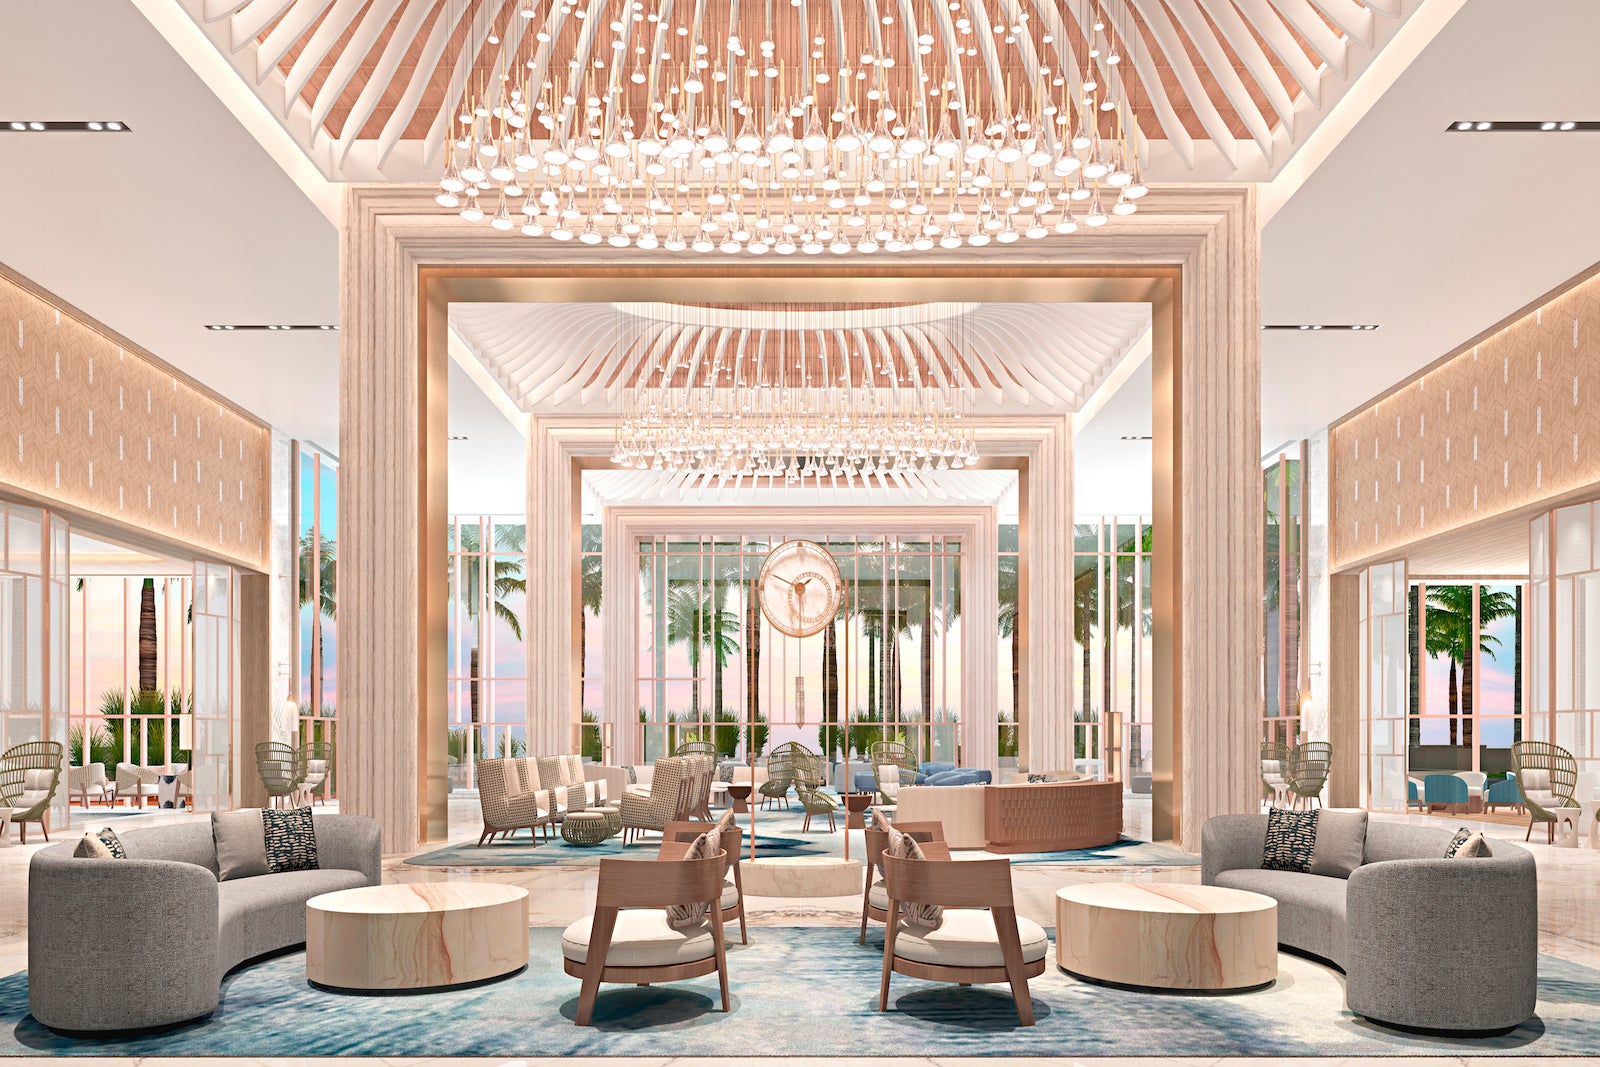 immaculate white and rose gold hold lobby